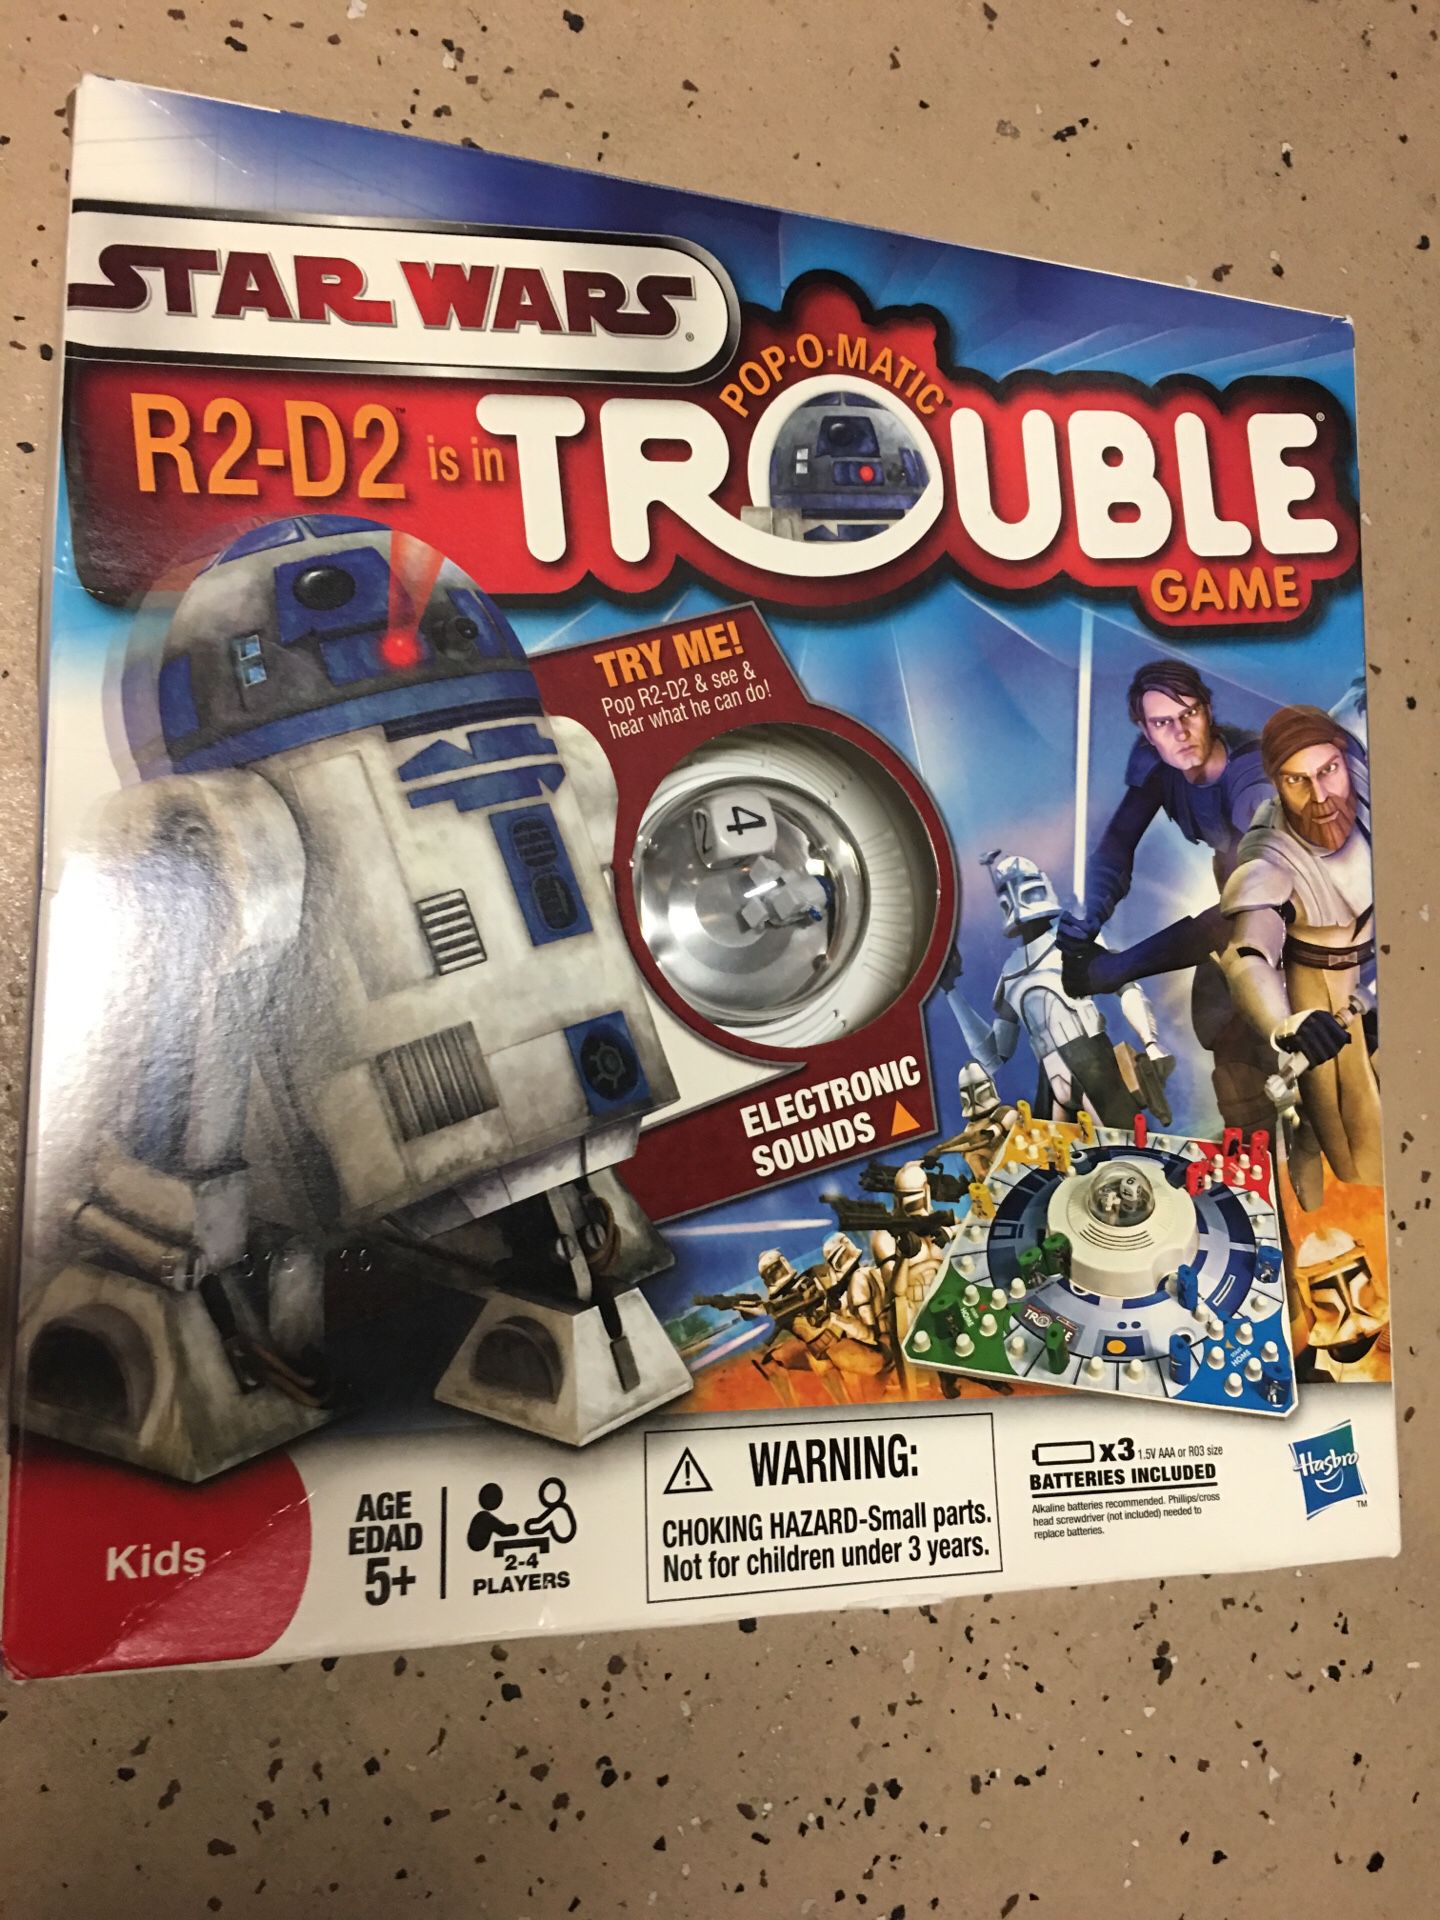 Star Wars R2-D2 is in TROUBLE game